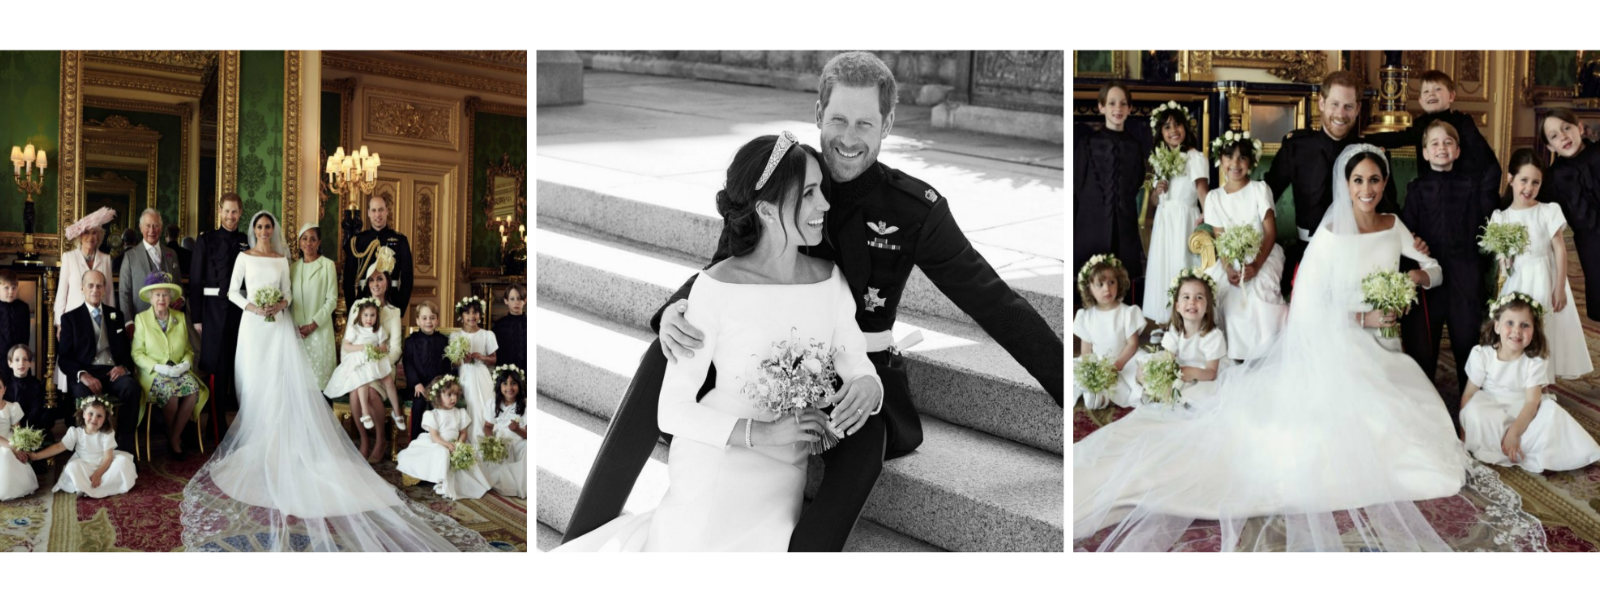 Harry and Meghan release wedding photos